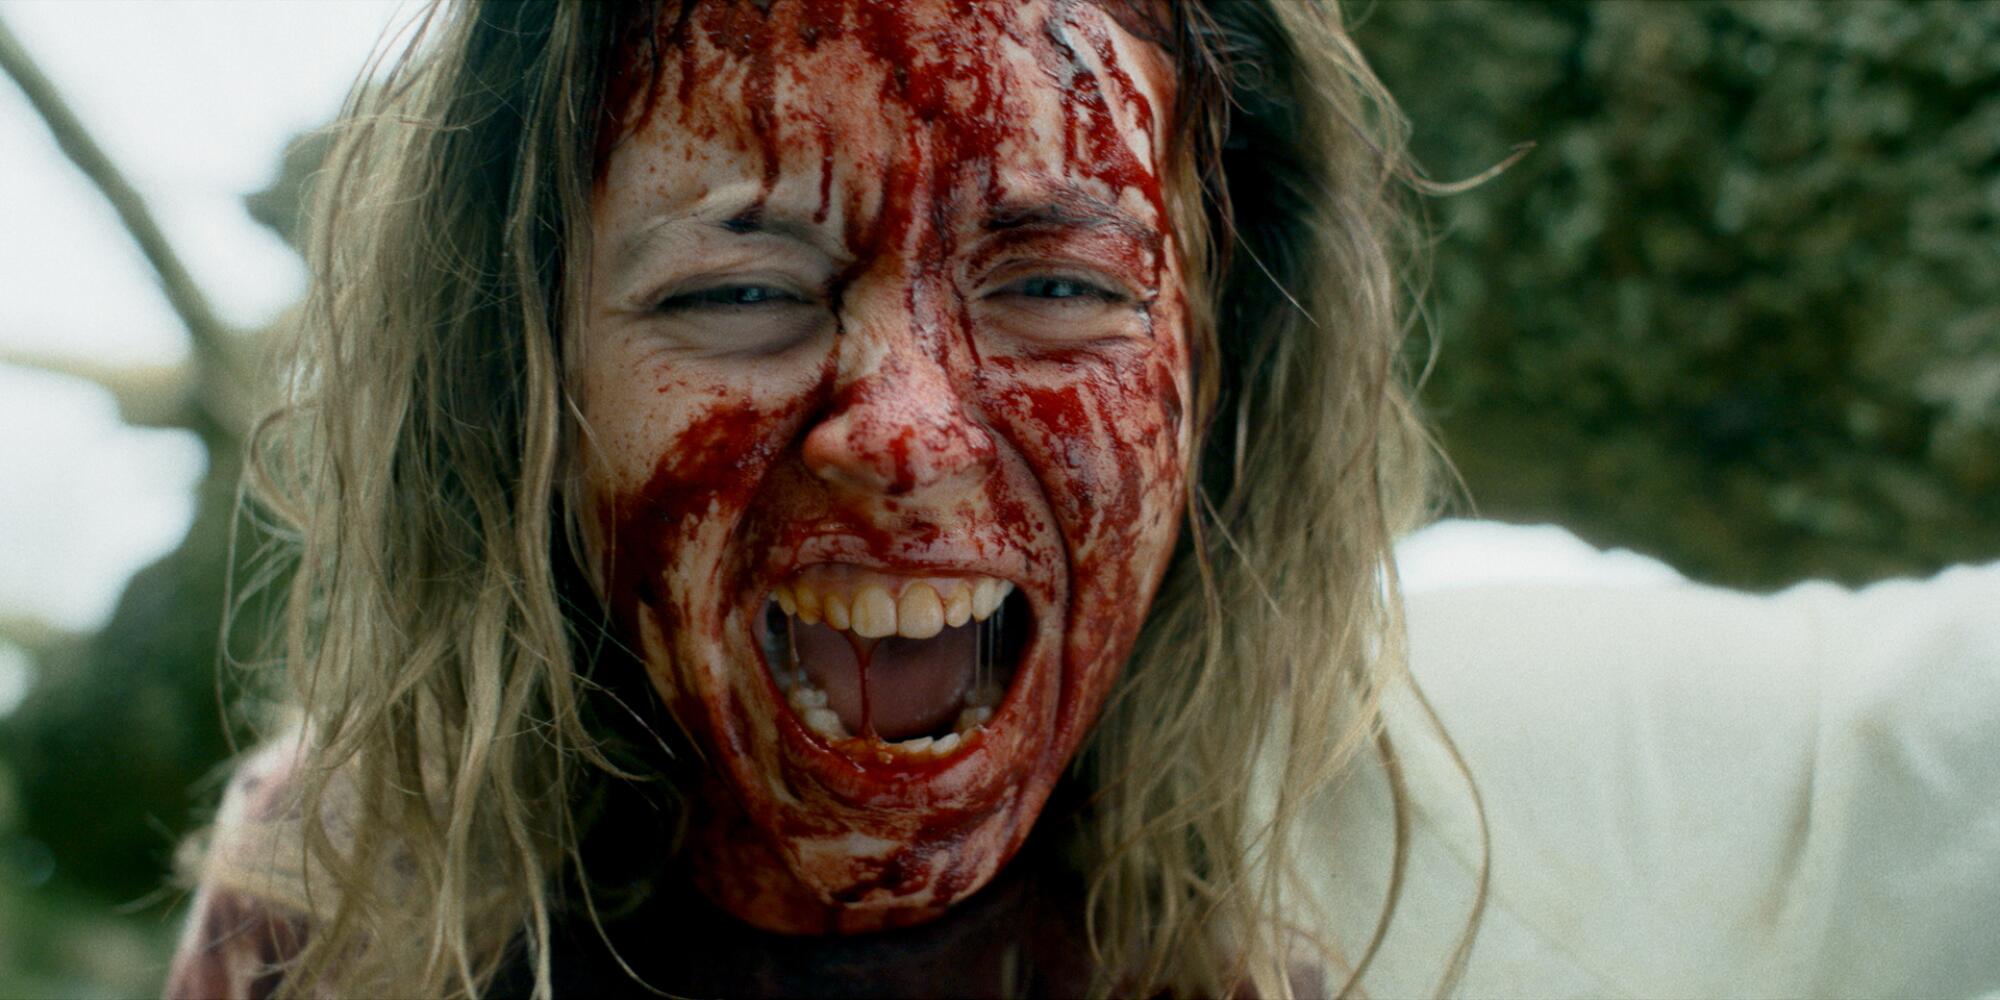 A woman with blood on her face screams.